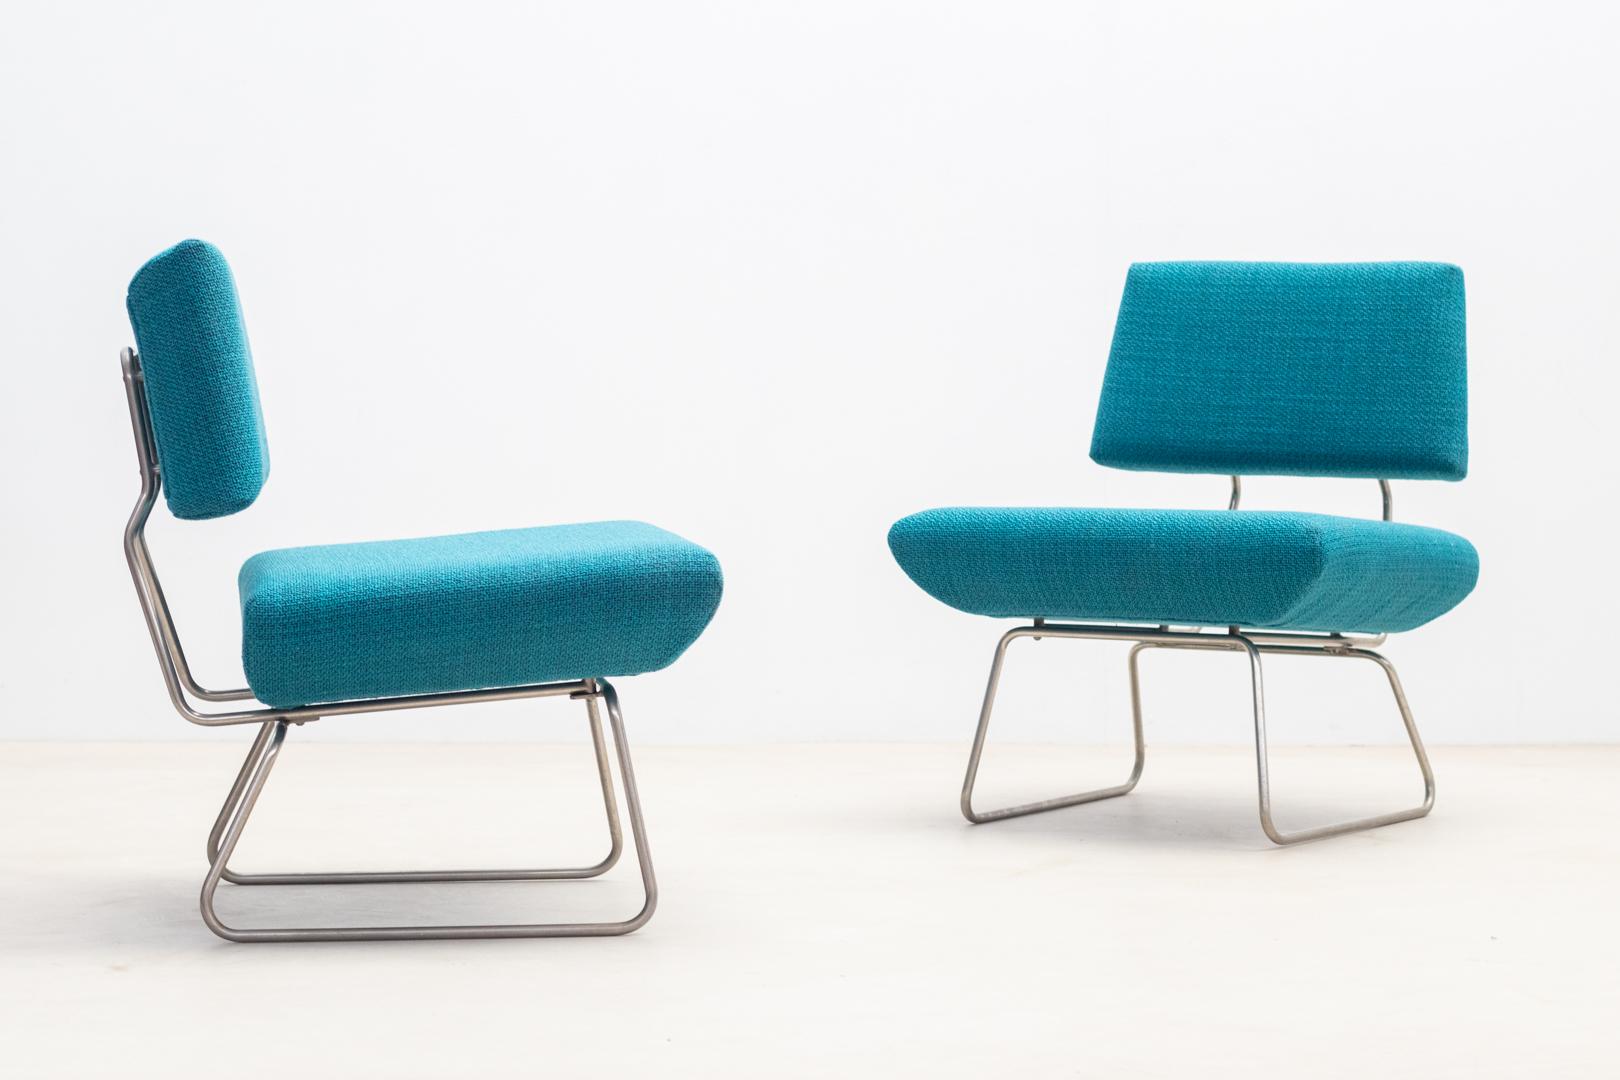 Pair of low armchairs with clean lines  by Georges Coslin produced by Trevi Spa in the 1960s
These armchairs feature a distinctive metal tubular structure that is provides durability and support. 
The seats and backrests of these armchairs are